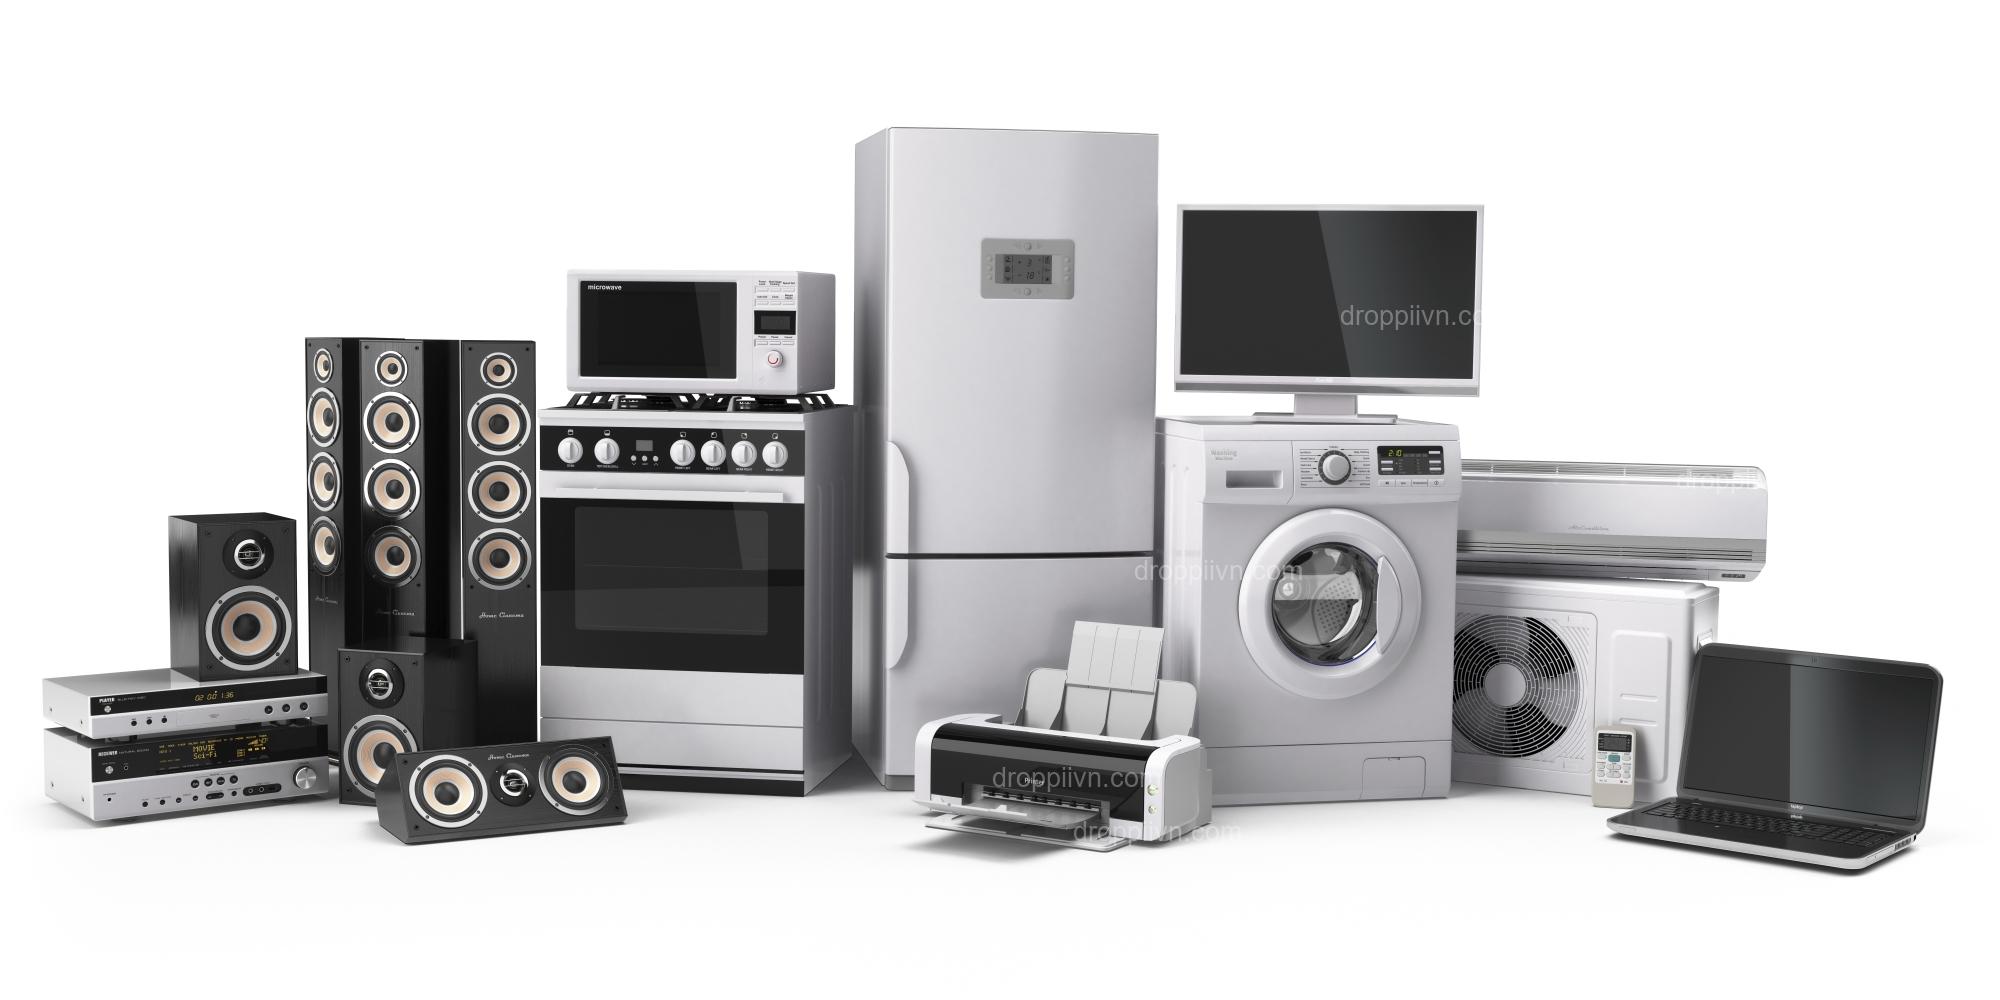 There are a variety of different types of home appliances, including appliances for cooking, cleaning, and laundry